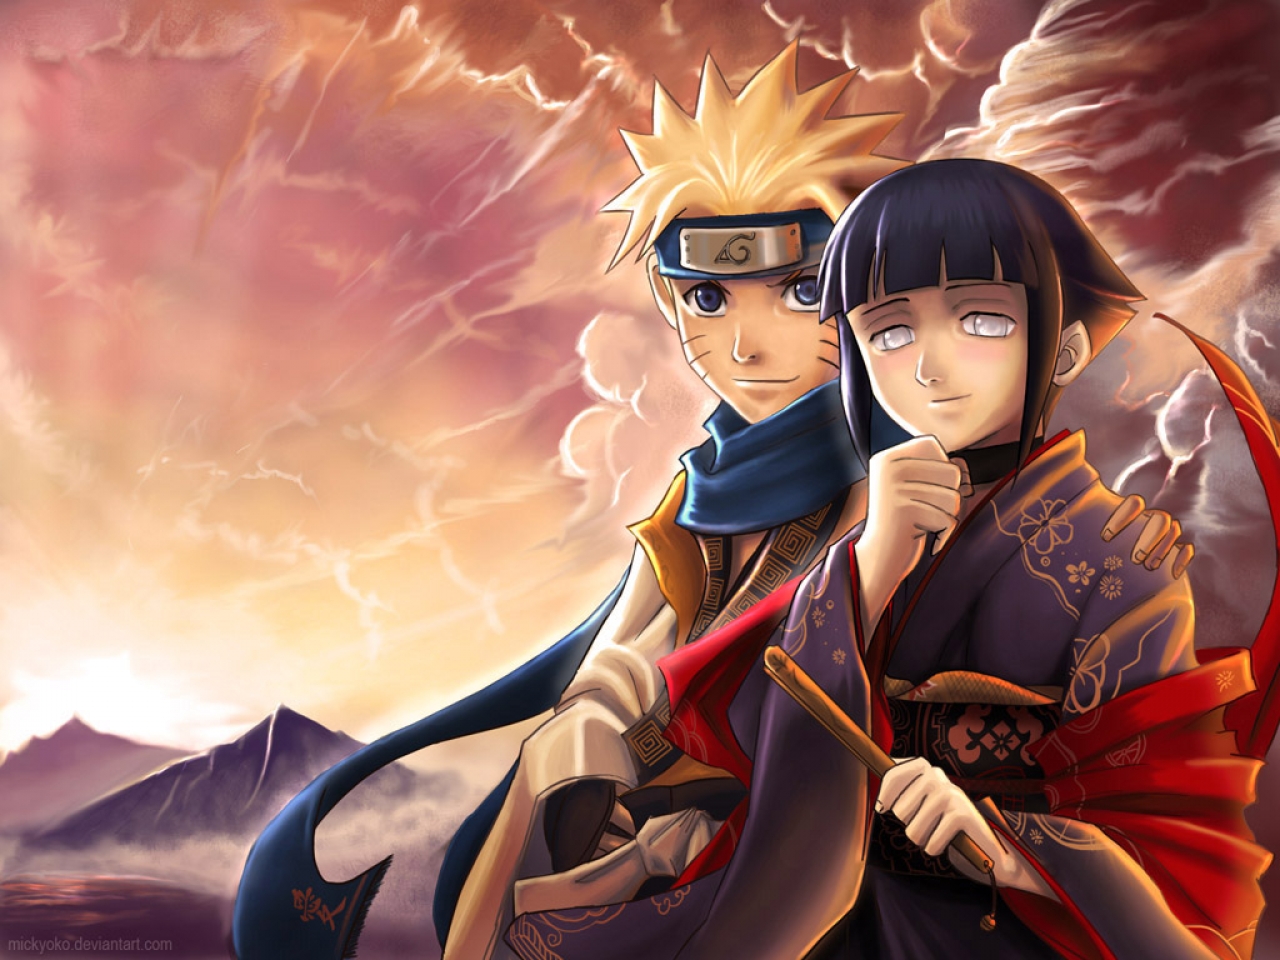 Hinata Naruto Wallpaper Anime Amp Pictures In HD